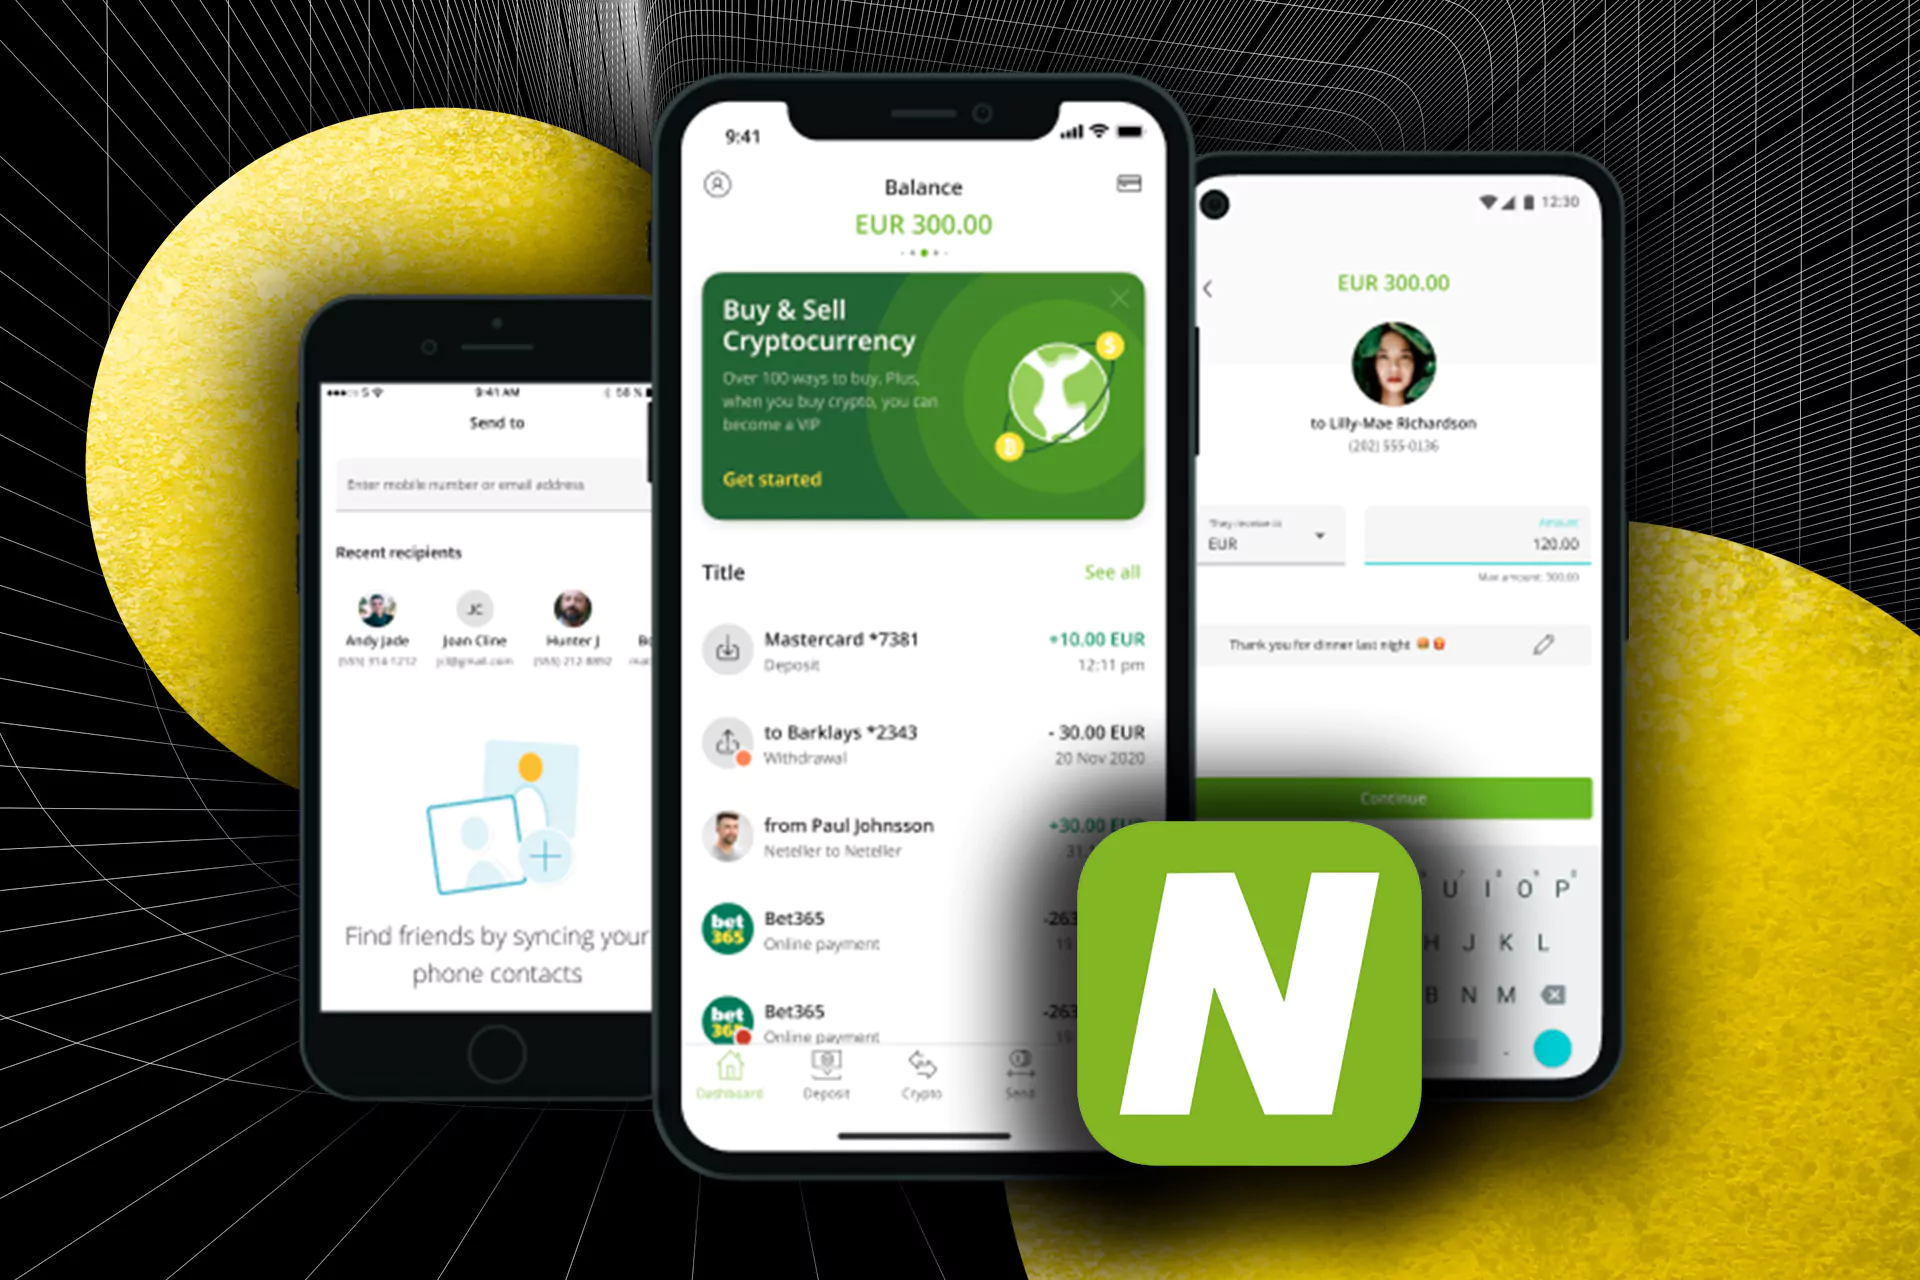 Neteller is a worldwide and very popular payment service and deposit method in india that is very popular in the sports betting industry, including cricket.